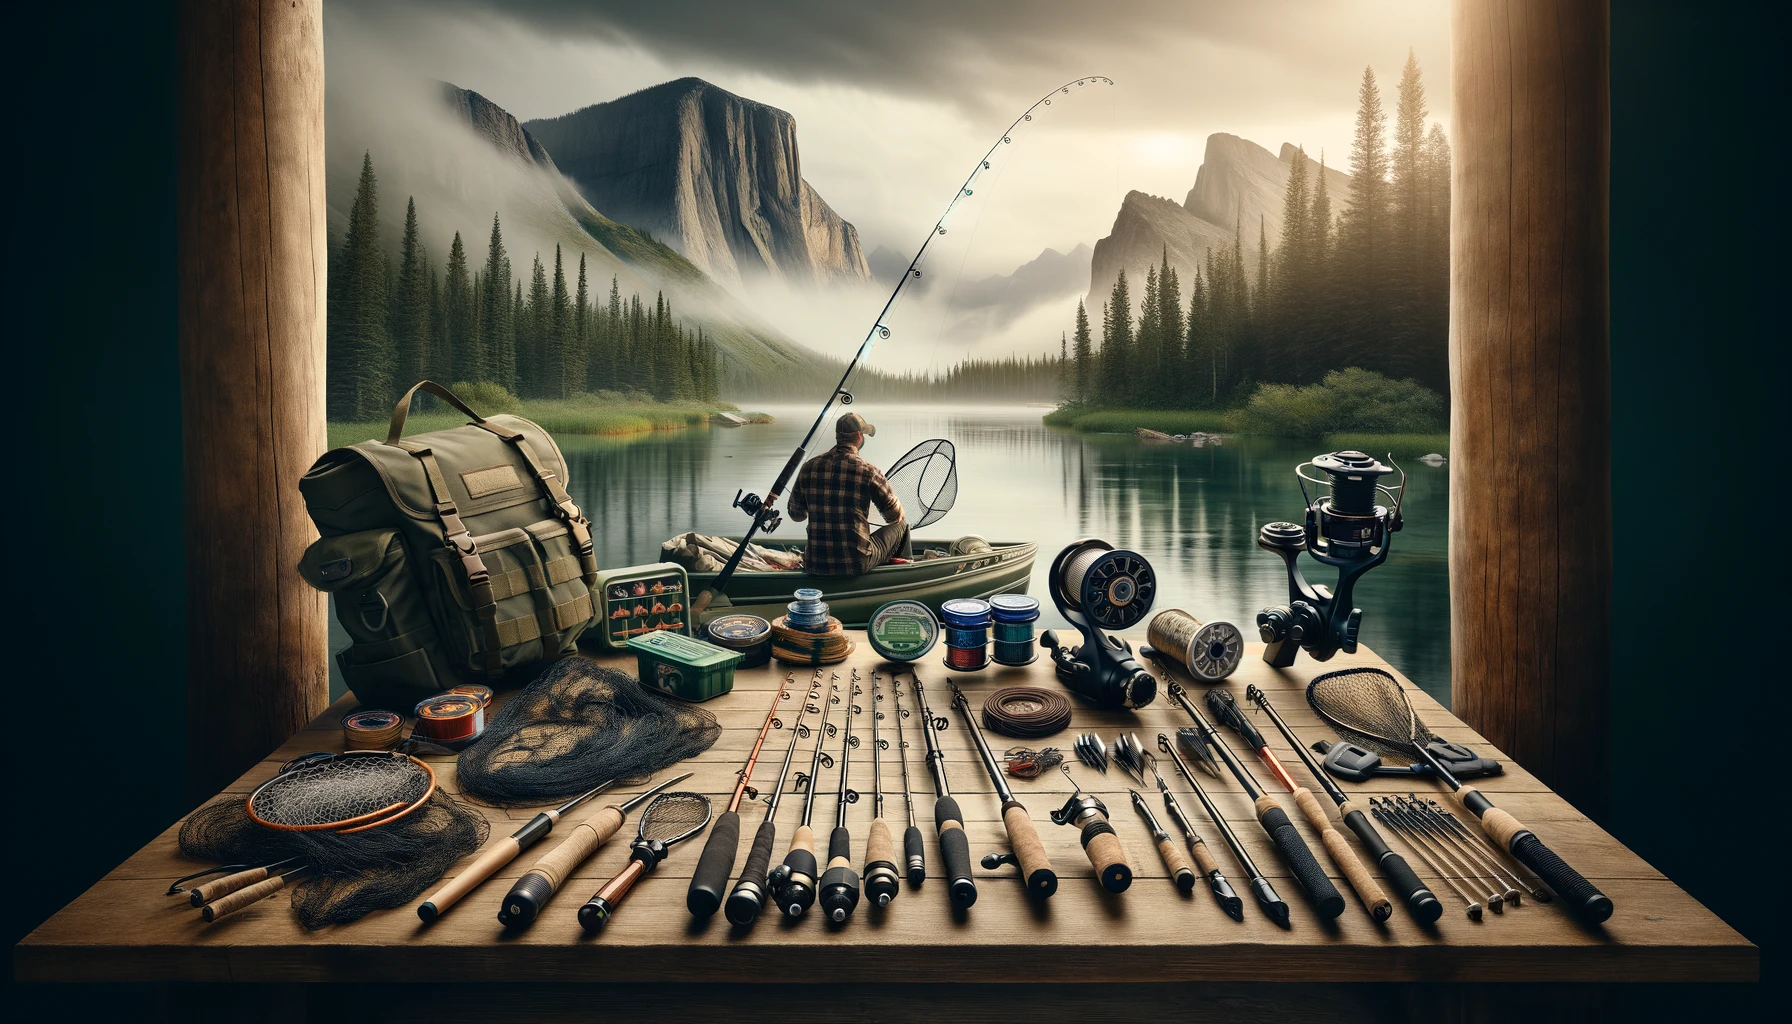 A compelling and informative depiction of essential fishing gear for survival, featuring durable fishing rods, multi-functional hooks, lightweight nets, and portable fish finders. The scene, set against a serene lake or river environment, emphasizes the practicality and versatility of the gear, either through an organized display or demonstrated by a survivalist. This image educates and inspires outdoor enthusiasts and survival experts on the strategic selection of fishing gear, highlighting efficiency, reliability, and adaptability in wilderness survival situations